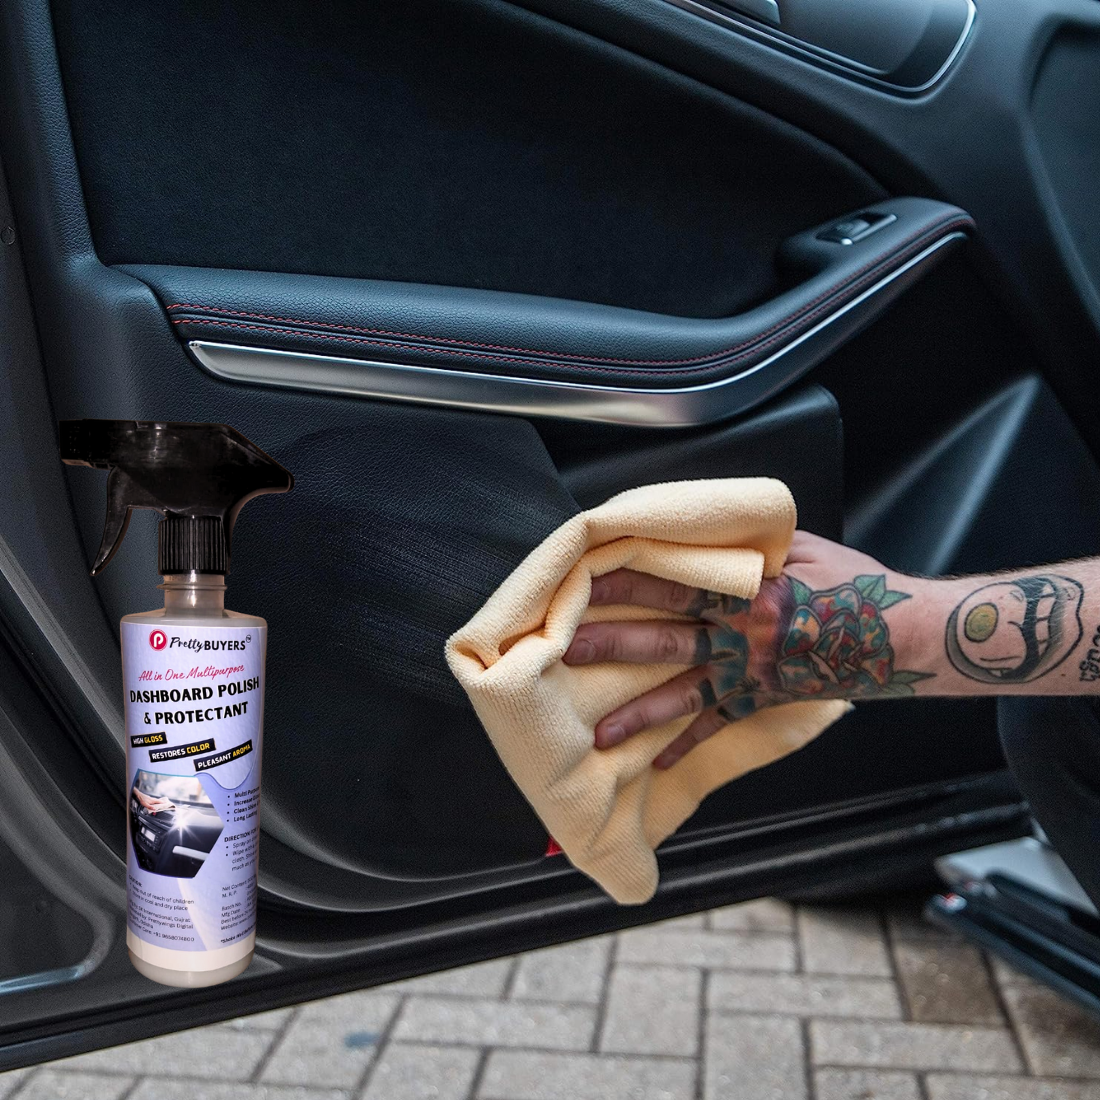 PrettyBUYERS Dashboard Polish and Protectant Spray 500 ML | Car Dashboard Cleaner | Protects and Shines Interiors of Cars, Bikes, Motorcycles, and Scooters | Suitable for Fibre, Plastic Surfaces, Vinyl Rubber, and Finished Leather(Pack Of 3)